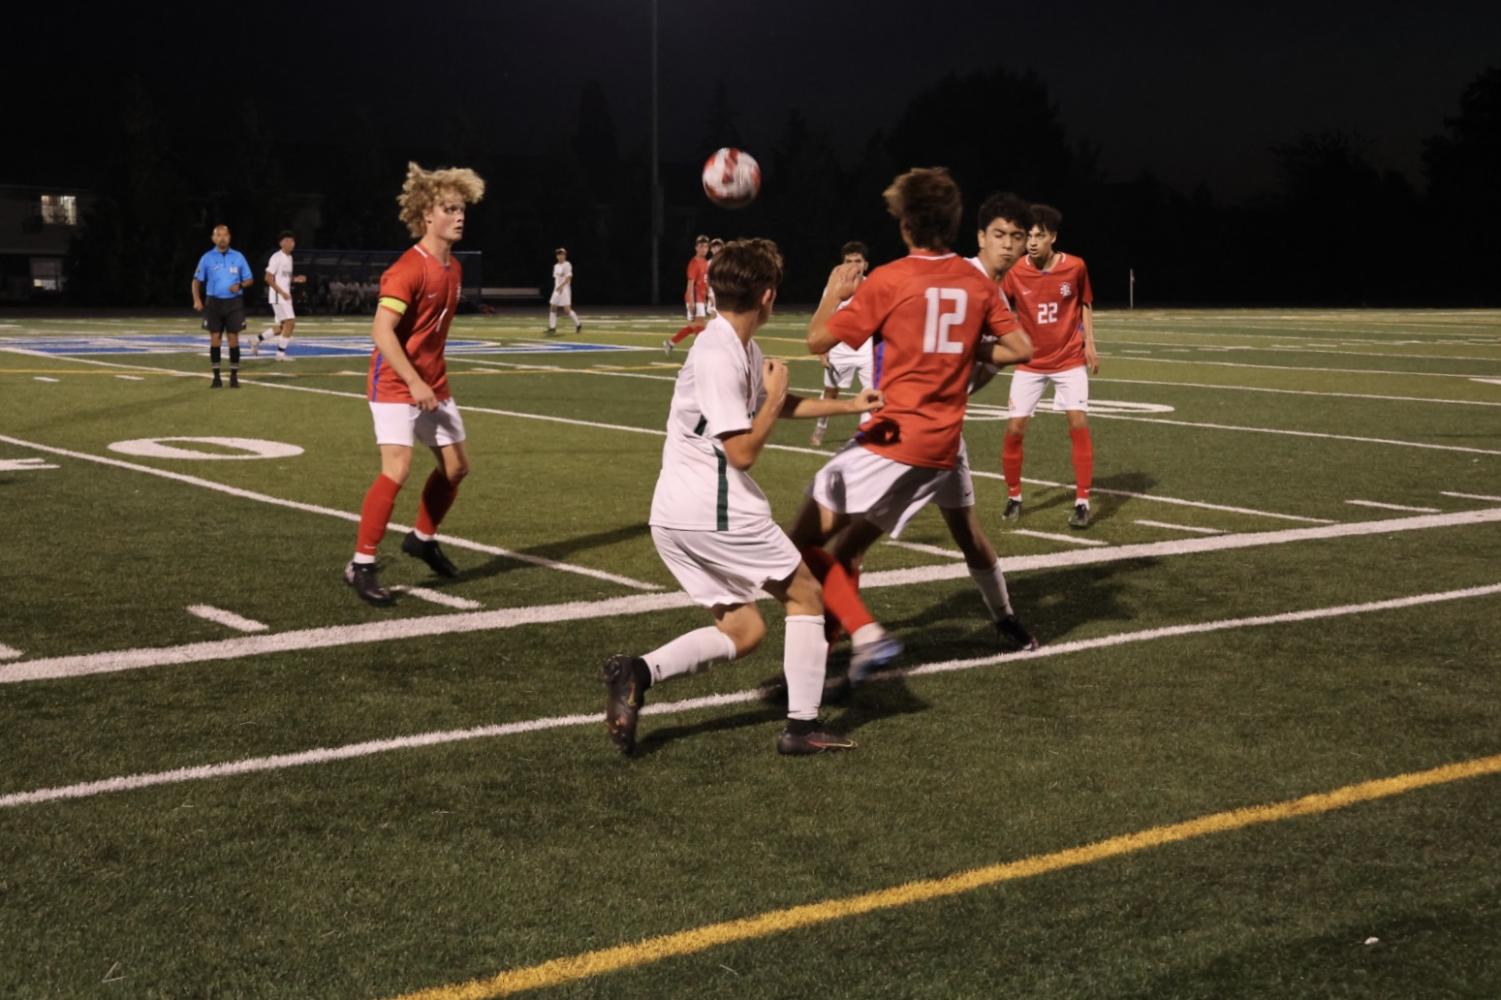 Photo+Story%3A+La+Salle+Varsity+Boys+Soccer+Wins+First+League+Game